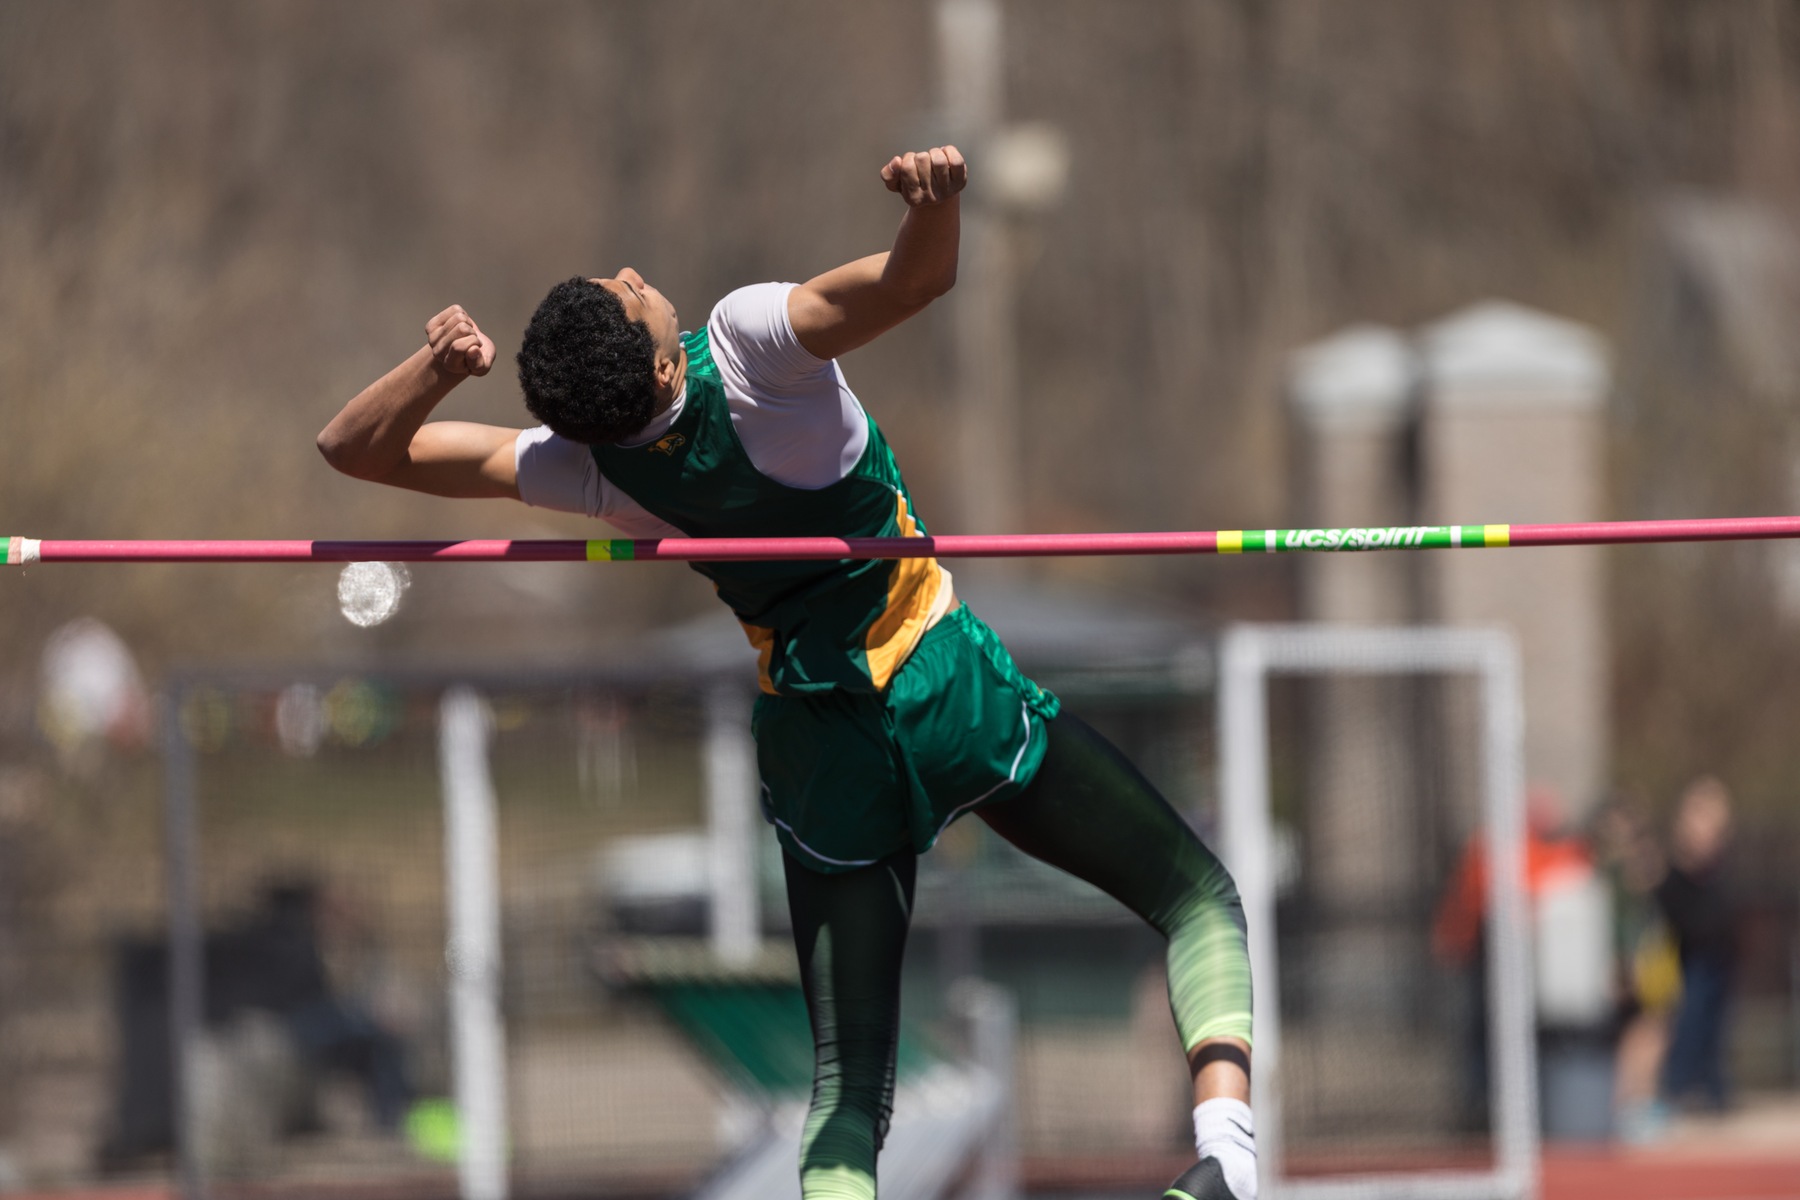 McWhinnie-Armstead To Represent Falcons At 2019 NCAA DIII Outdoor Track & Field Championships